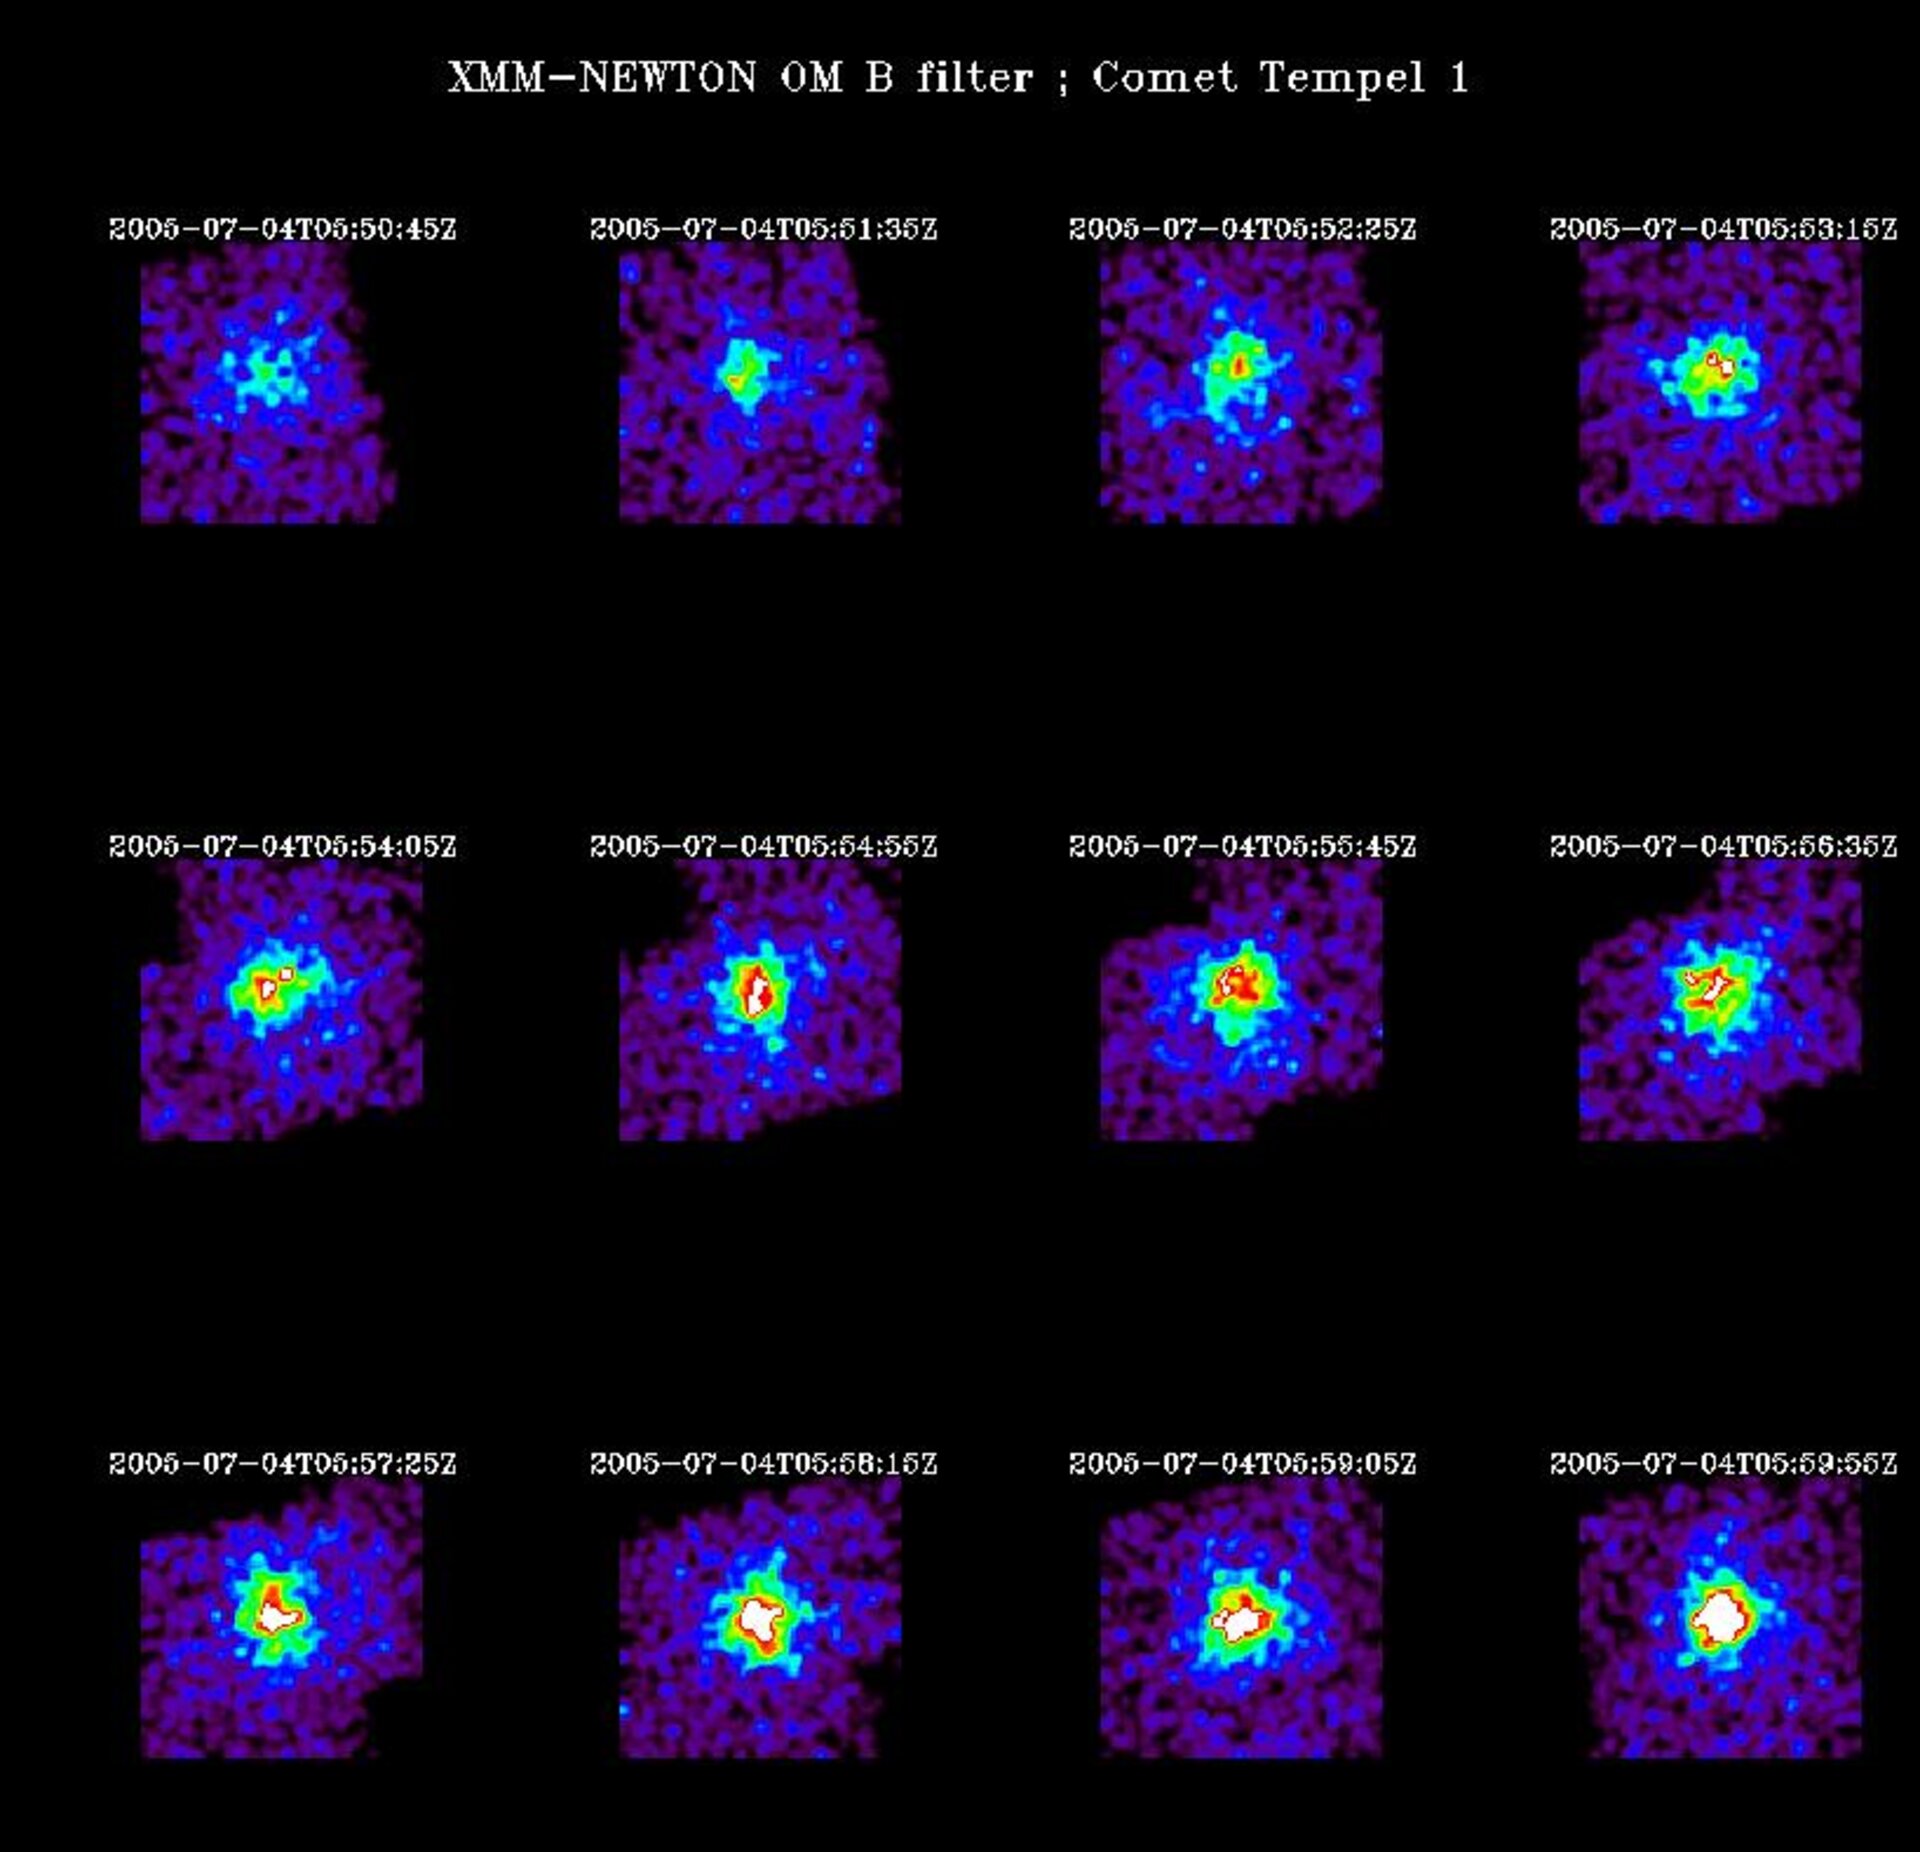 Collage of the XMM-Newton images